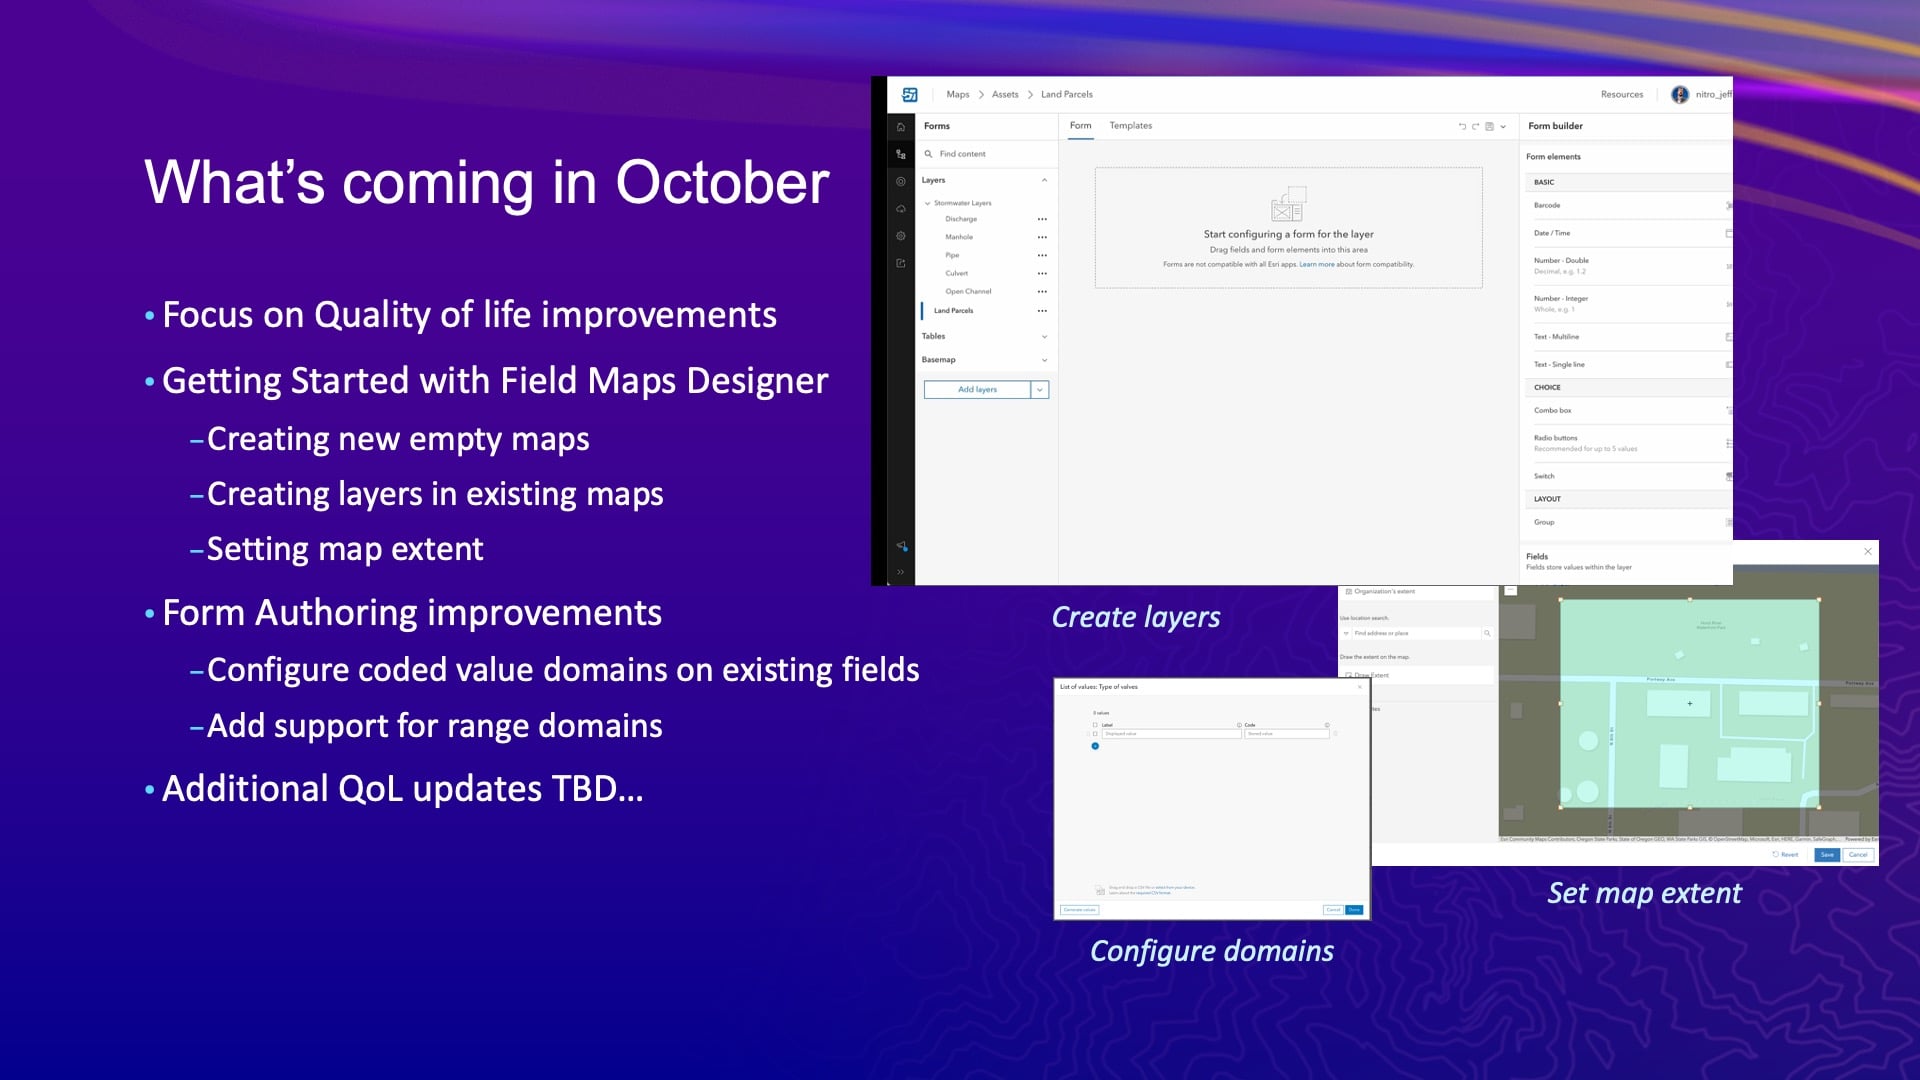 What's coming in Octover for ArcGIS Field Maps